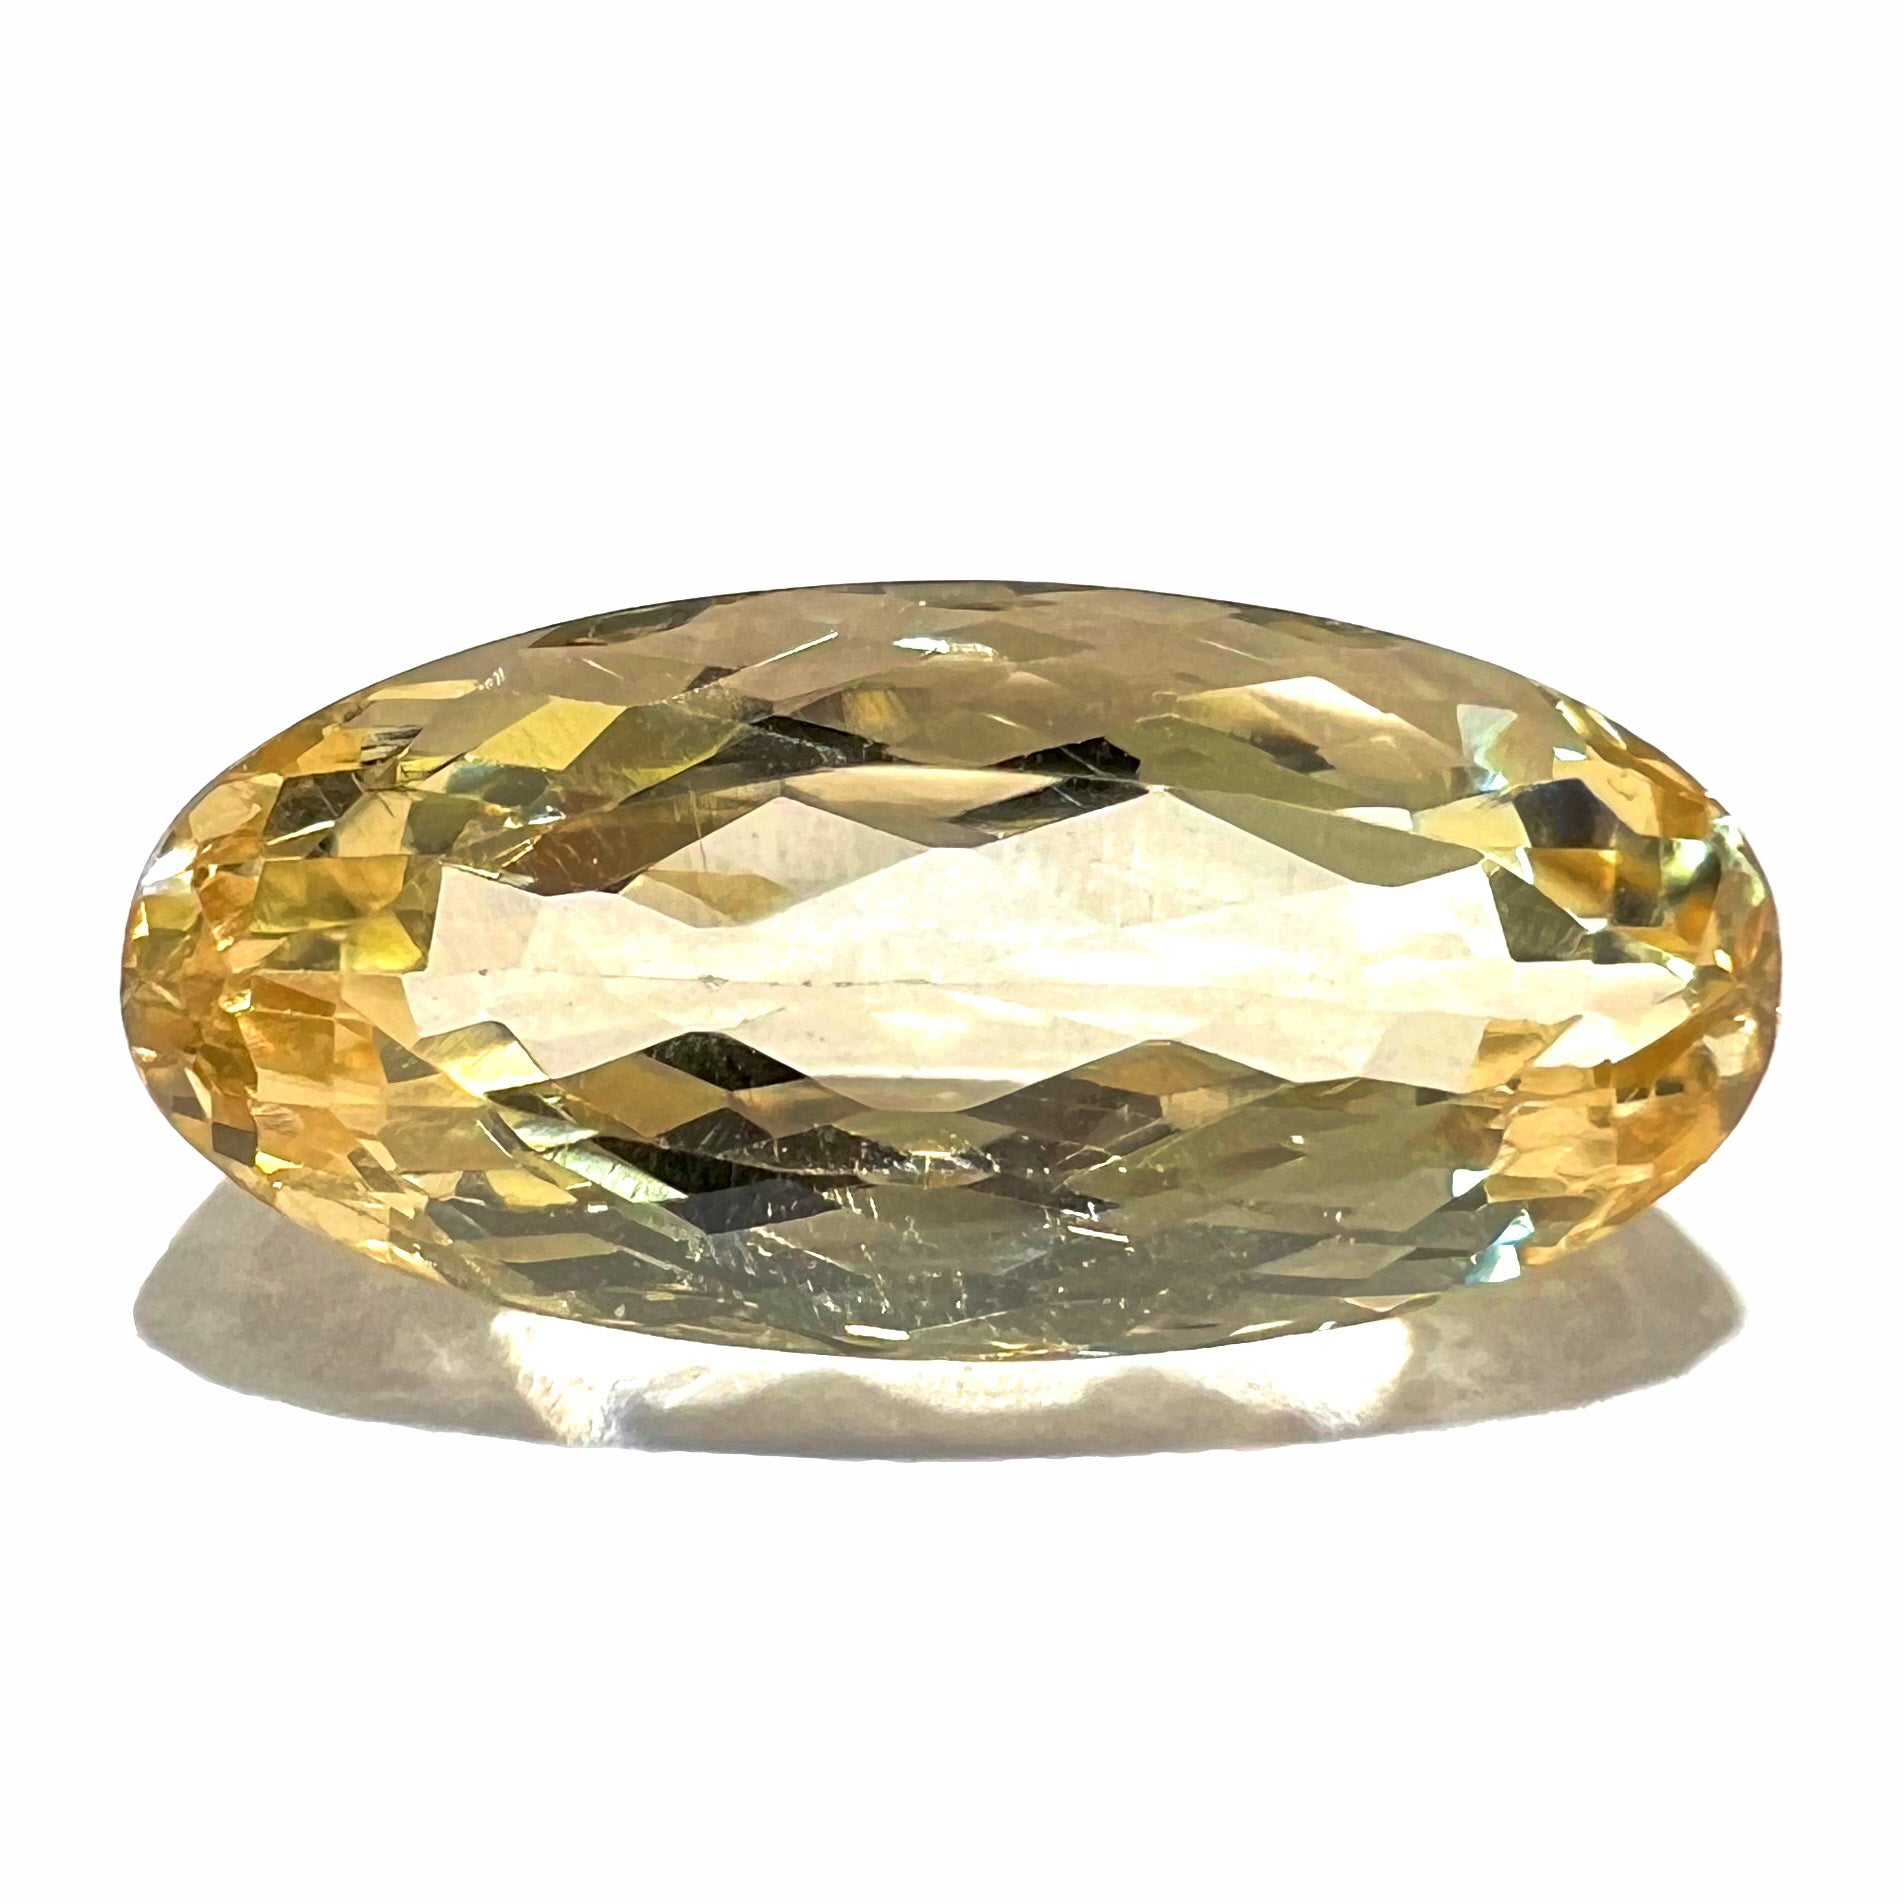 A loose, oval cut golden topaz gemstone.  A stronger concentration of yellow rests in the edges of the stone.